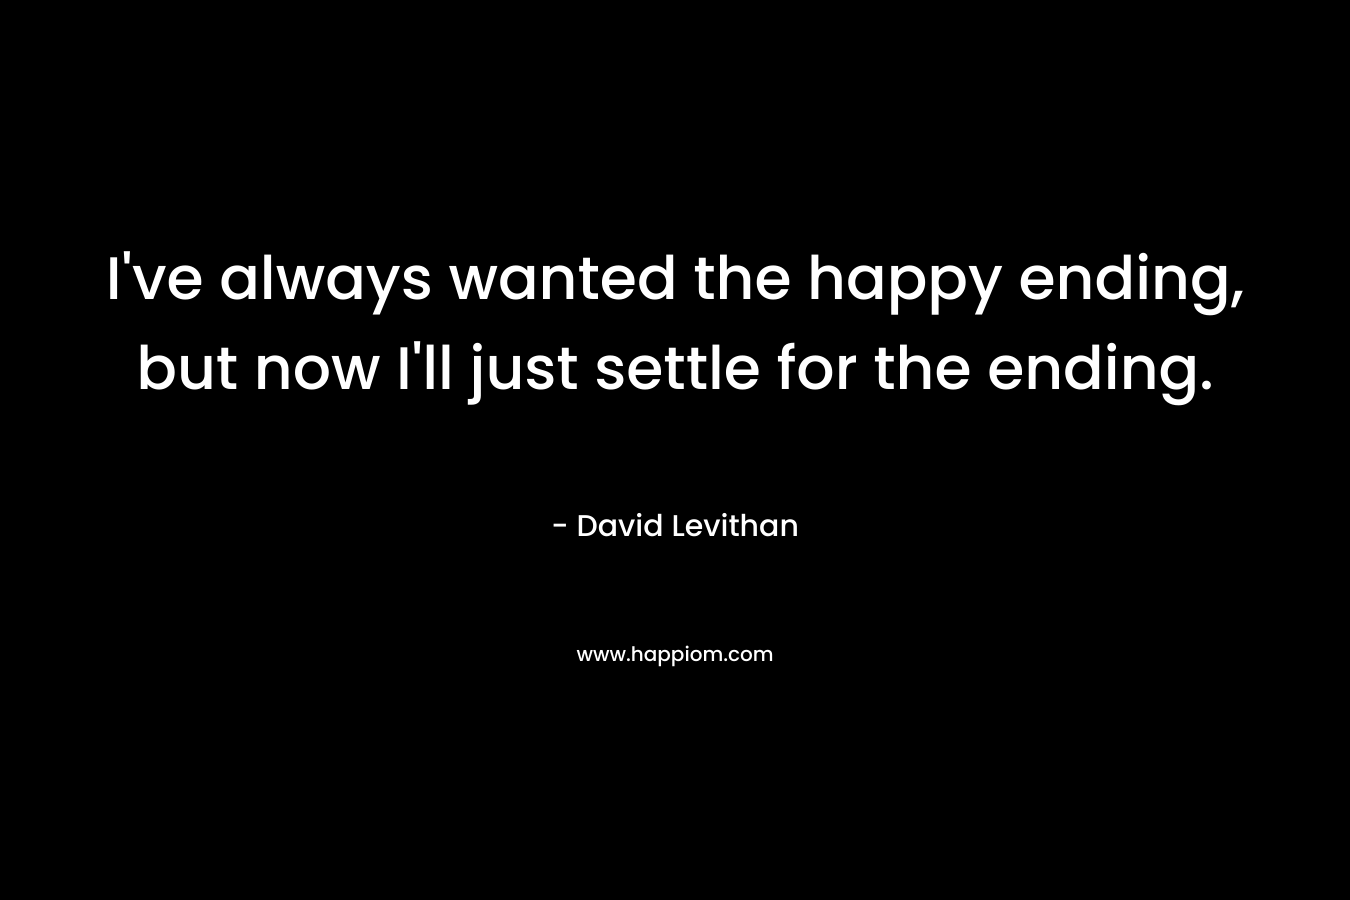 I've always wanted the happy ending, but now I'll just settle for the ending.